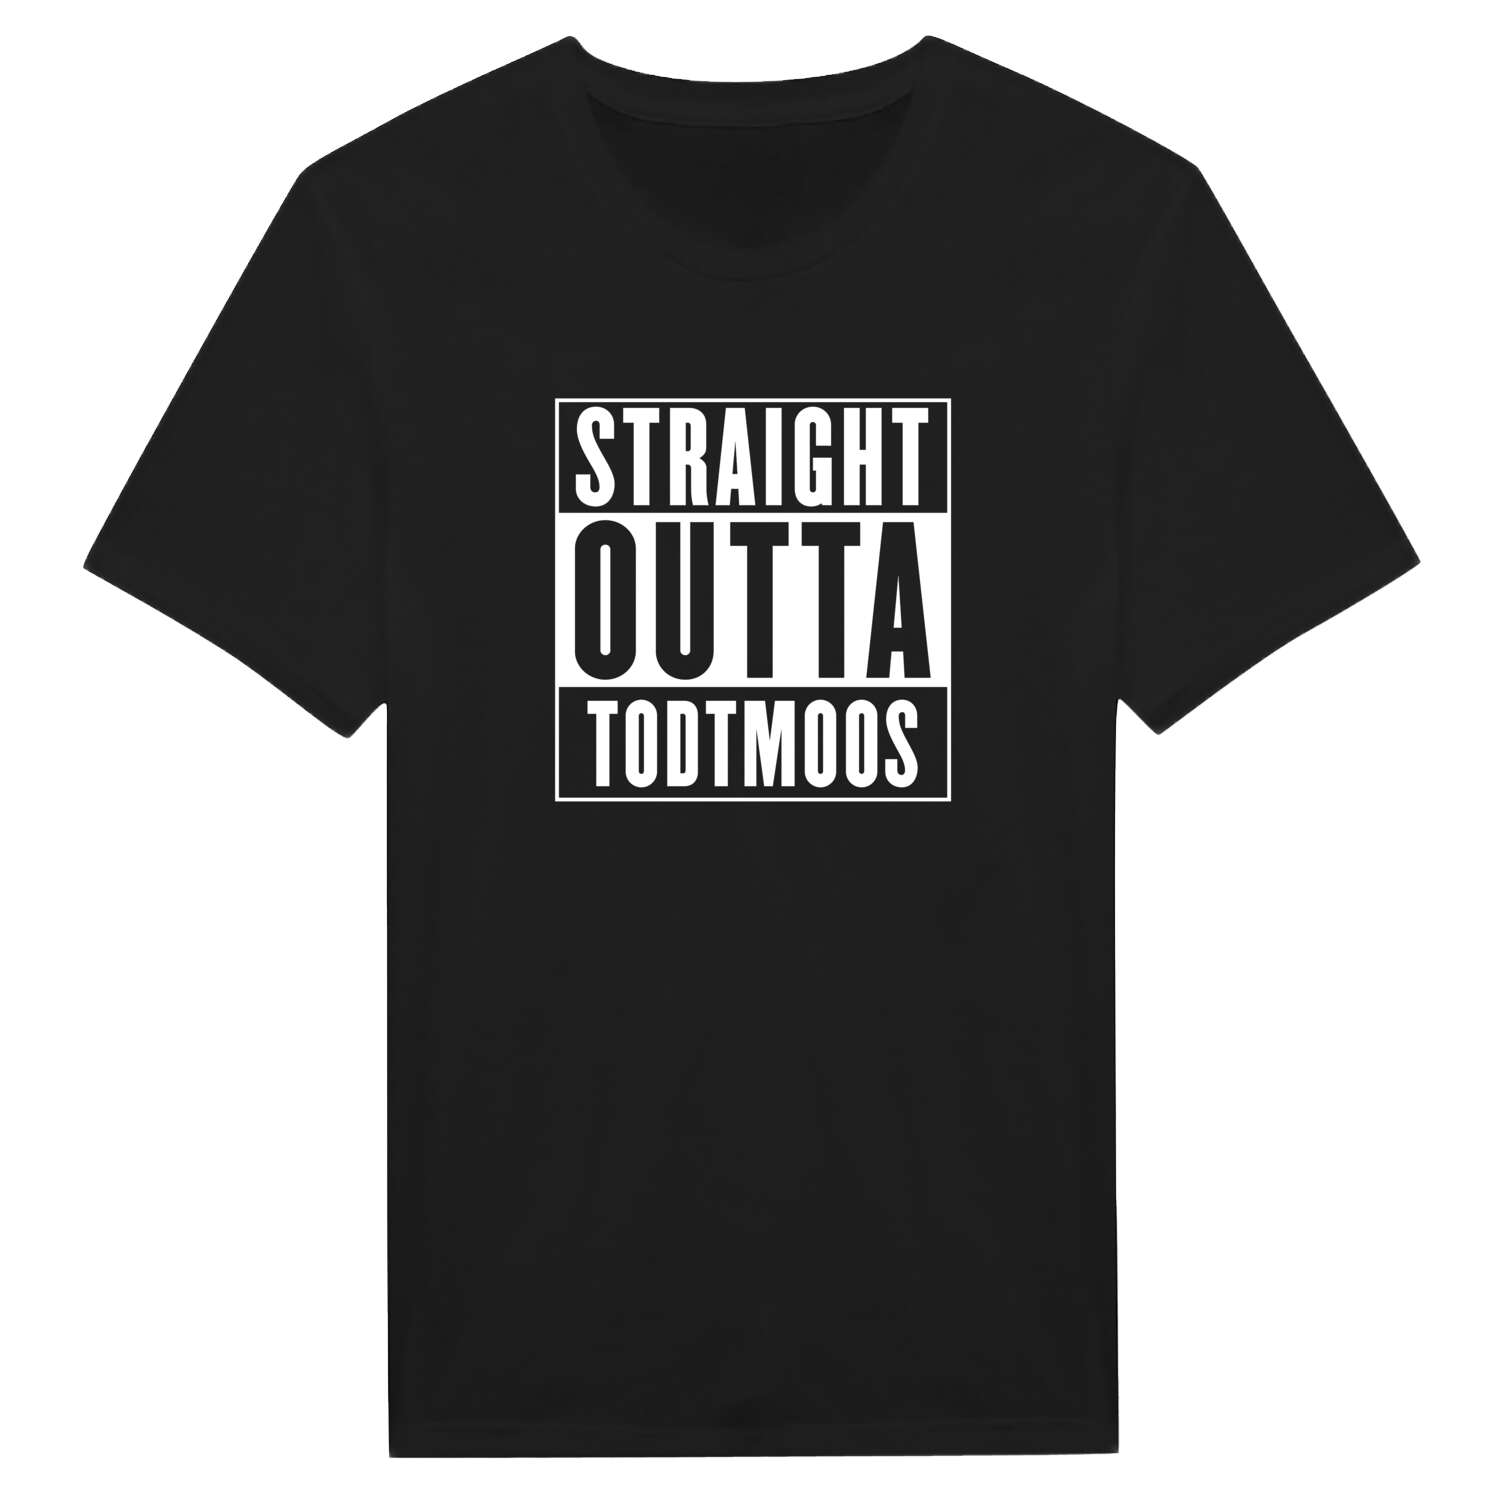 Todtmoos T-Shirt »Straight Outta«